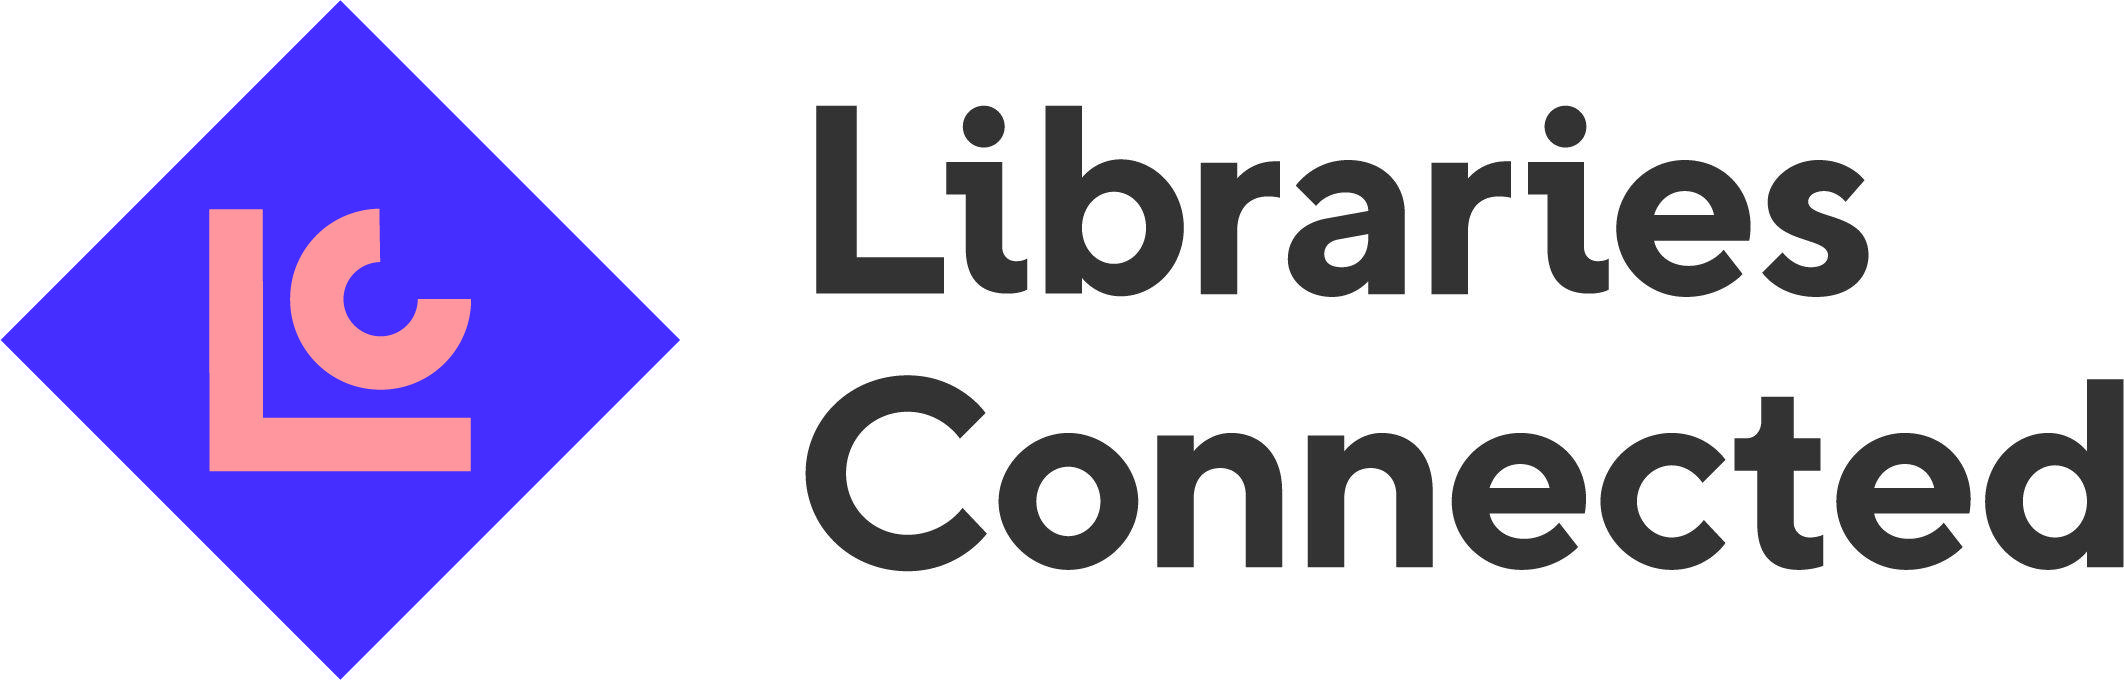 Purple Org Logo - Libraries Connected linear purple logo | Libraries Connected